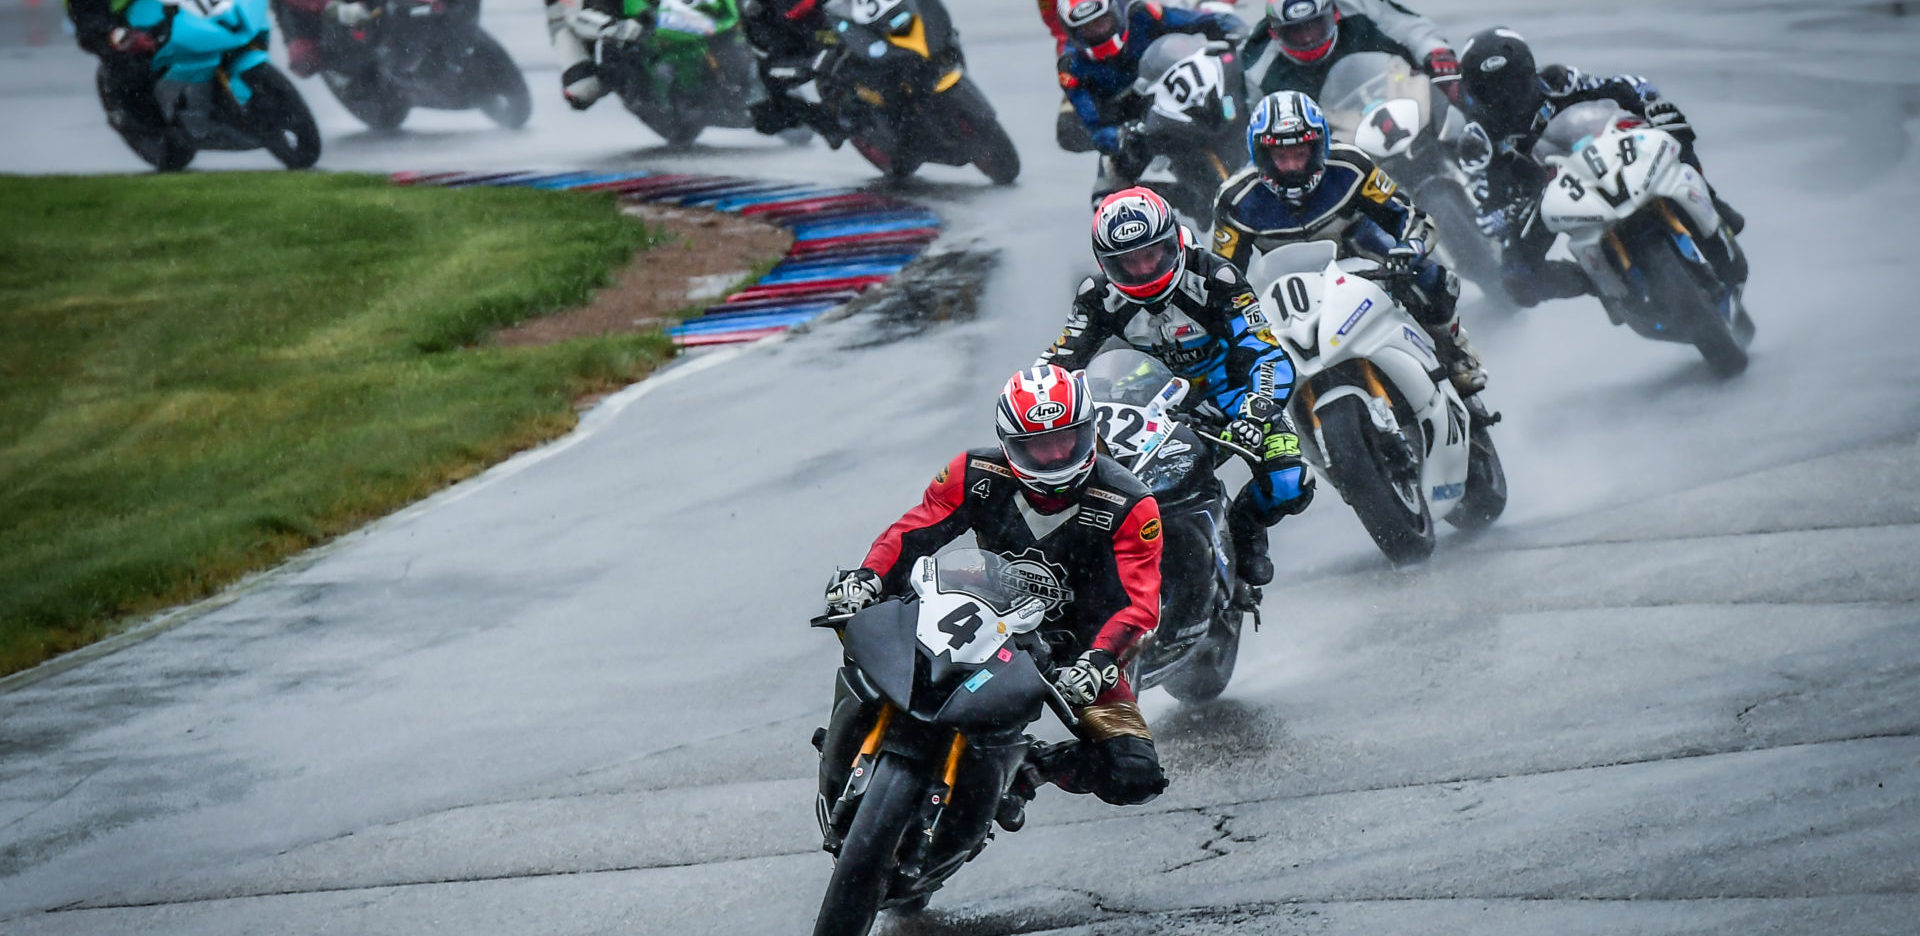 Scott Greenwood (4) leading a LRRS race at New Hampshire Motor Speedway in 2018. Photo courtesy of LRRS/NHMS.